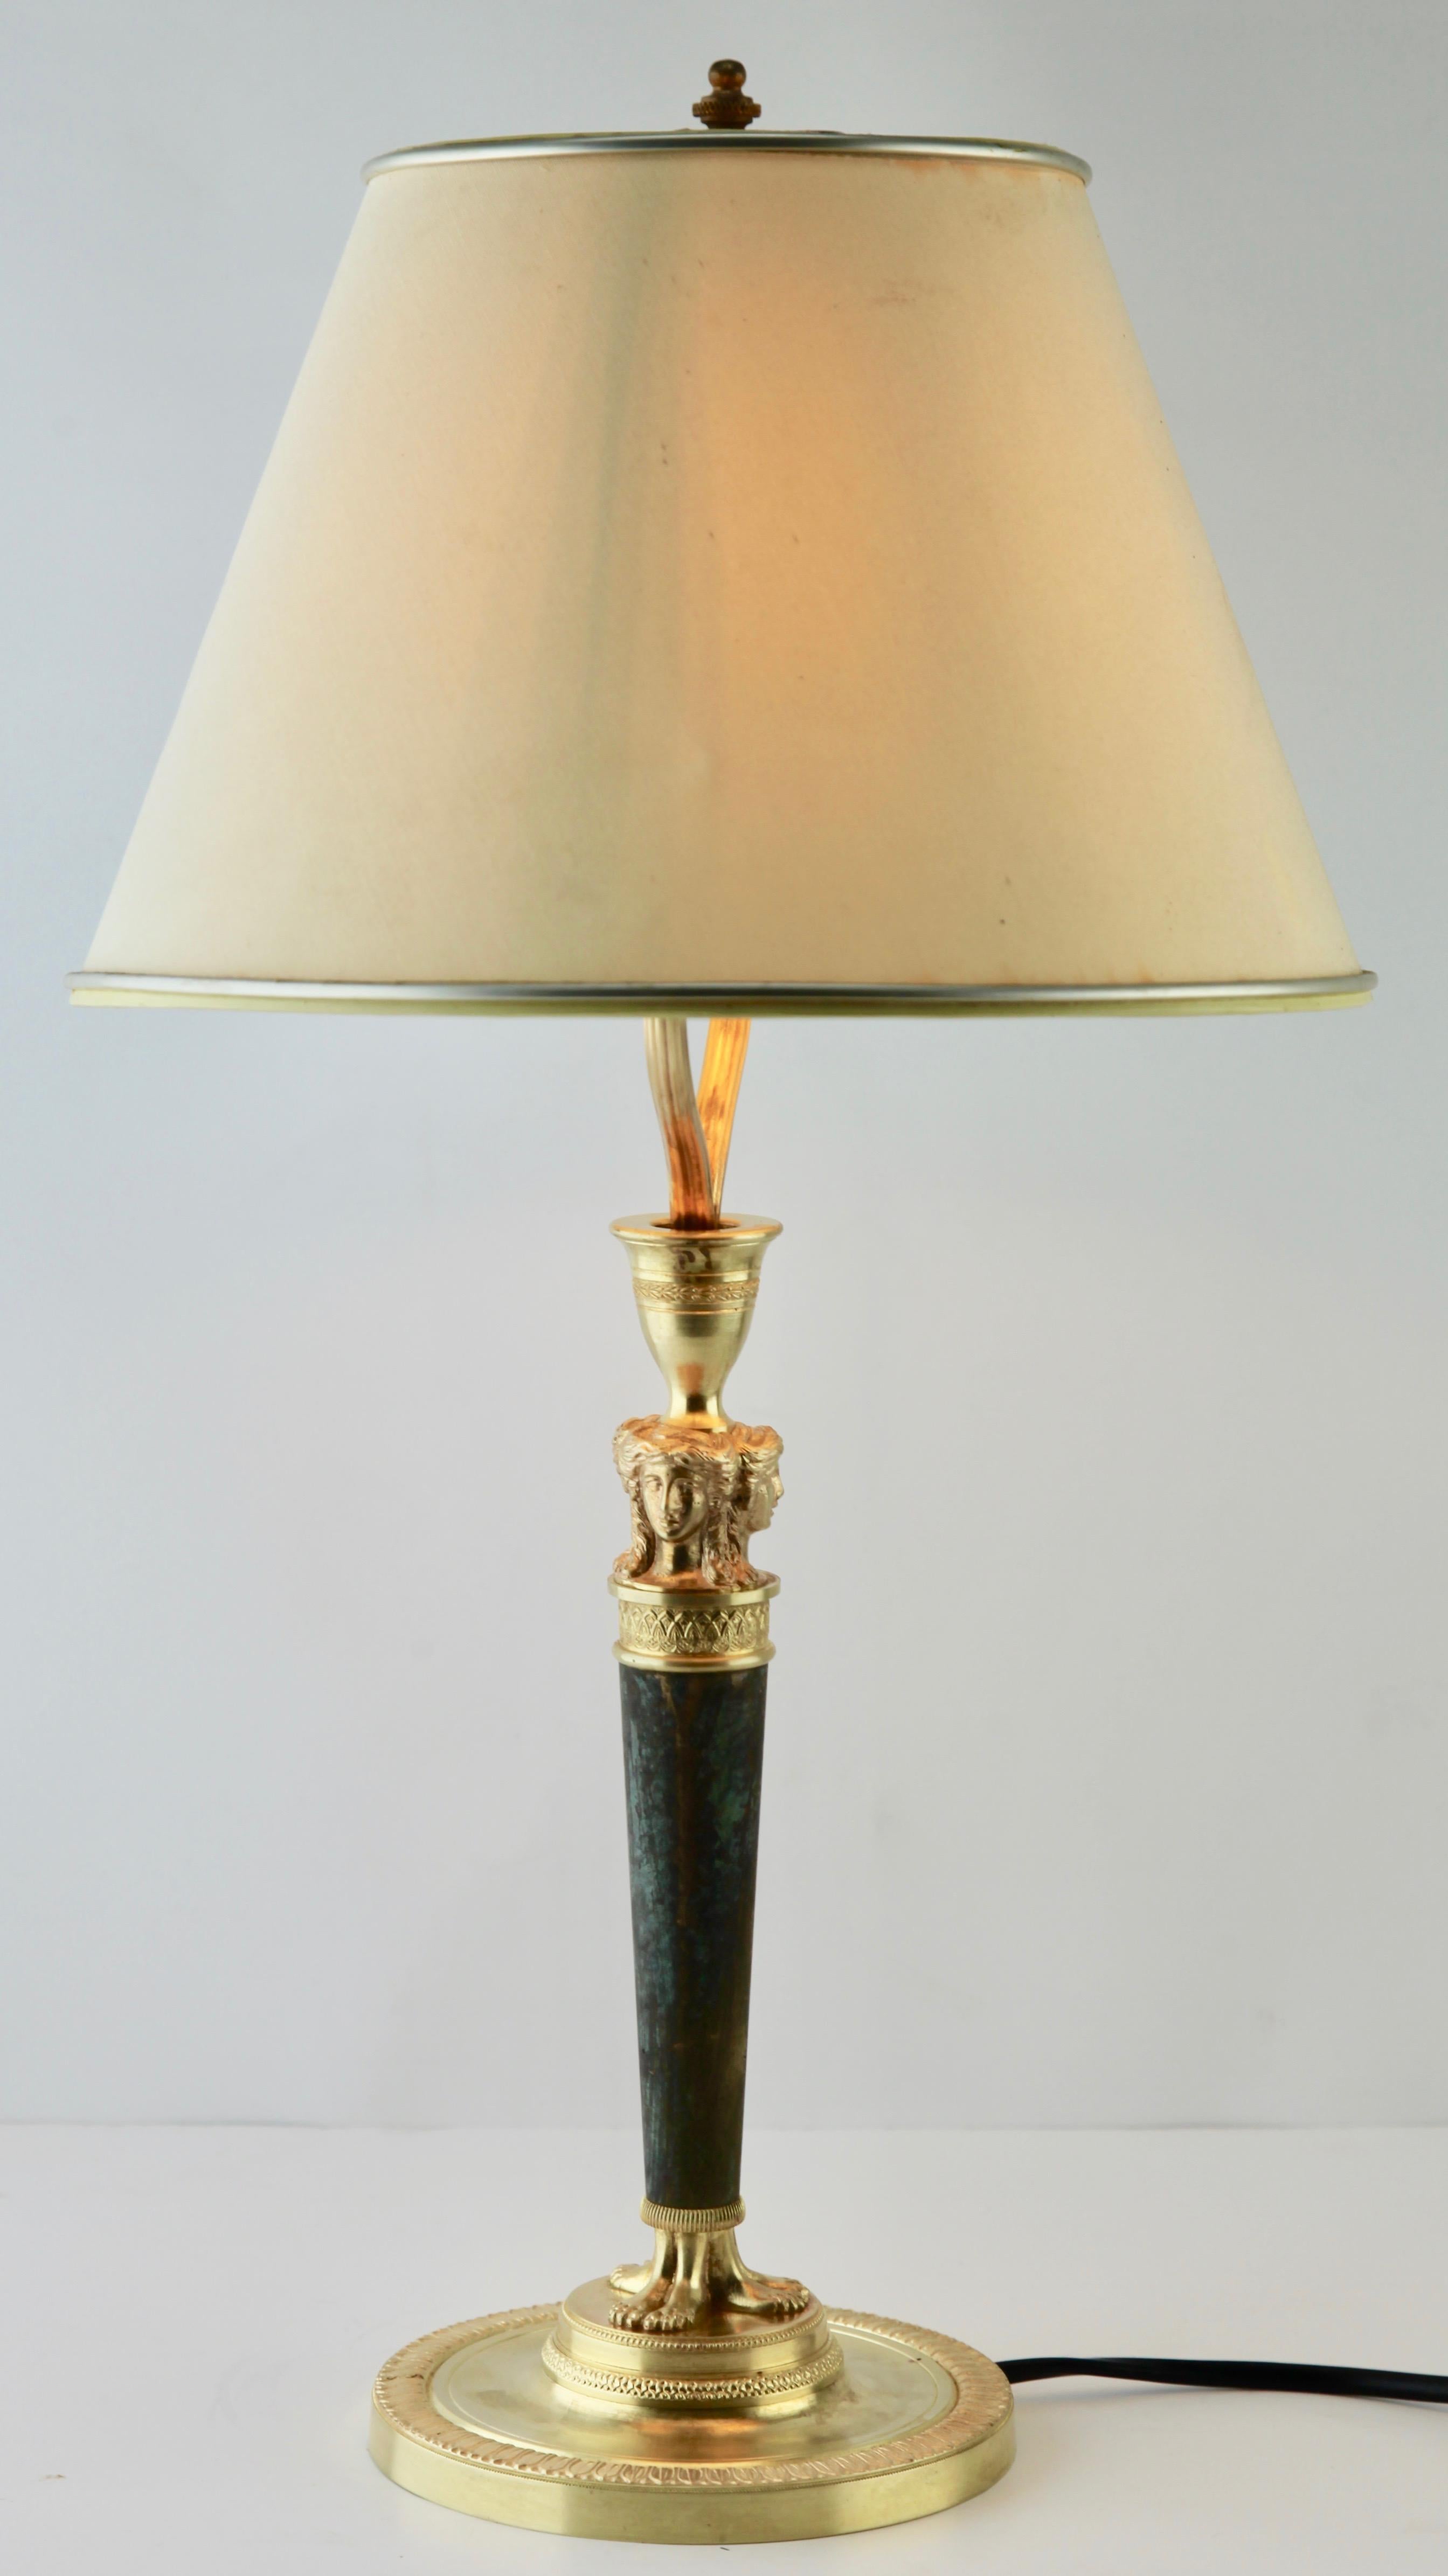 Mid-20th Century French Empire Style Bronze Gilded Desk or Table Lamp